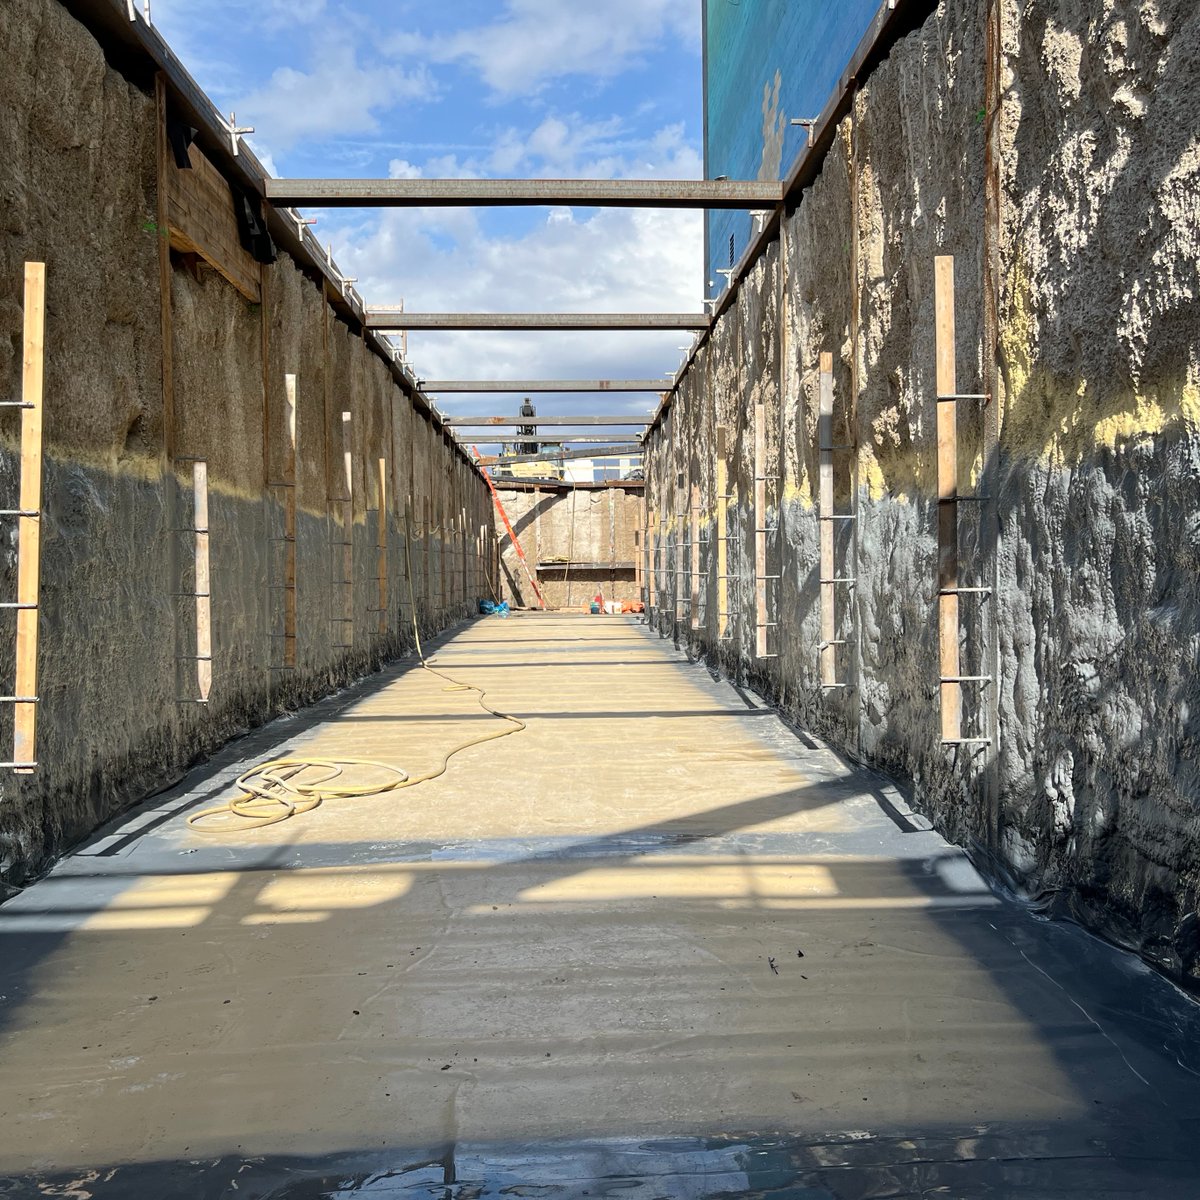 Exciting progress on the #KitchenerLine expansion project! 🚧🚆 Updates from near Bloor GO station include ClearVu fence installation, tunnel waterproofing, and retaining wall forming. Stay informed with more details here: bit.ly/3wZ4qQX